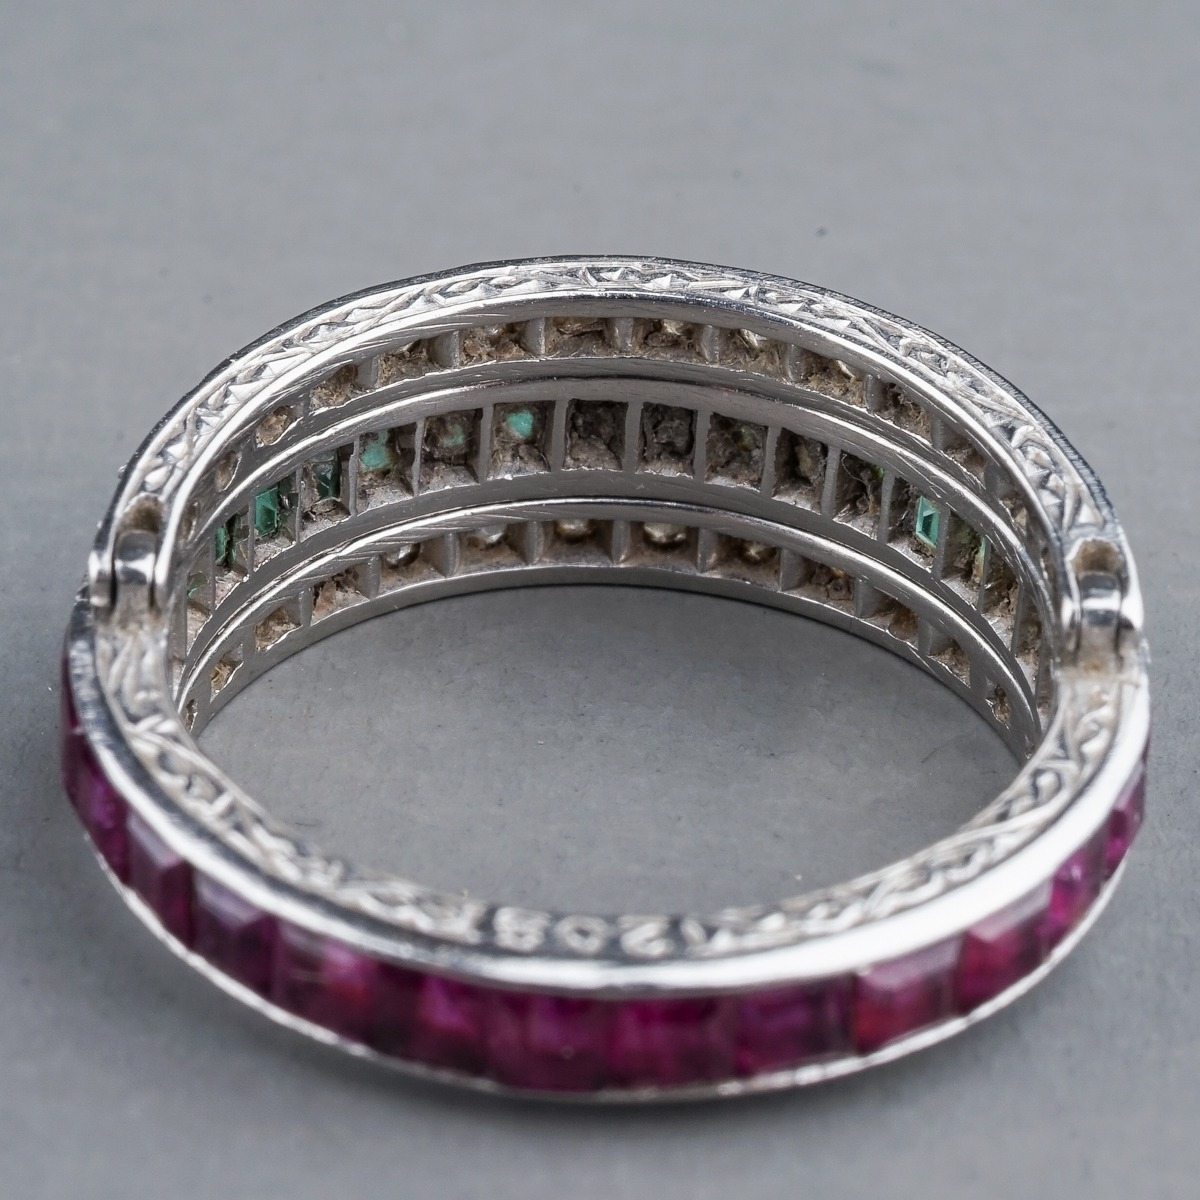 An Art Deco platinum diamond ruby and emerald swivel or flip ring, set with calibre cut rubies and - Image 5 of 6